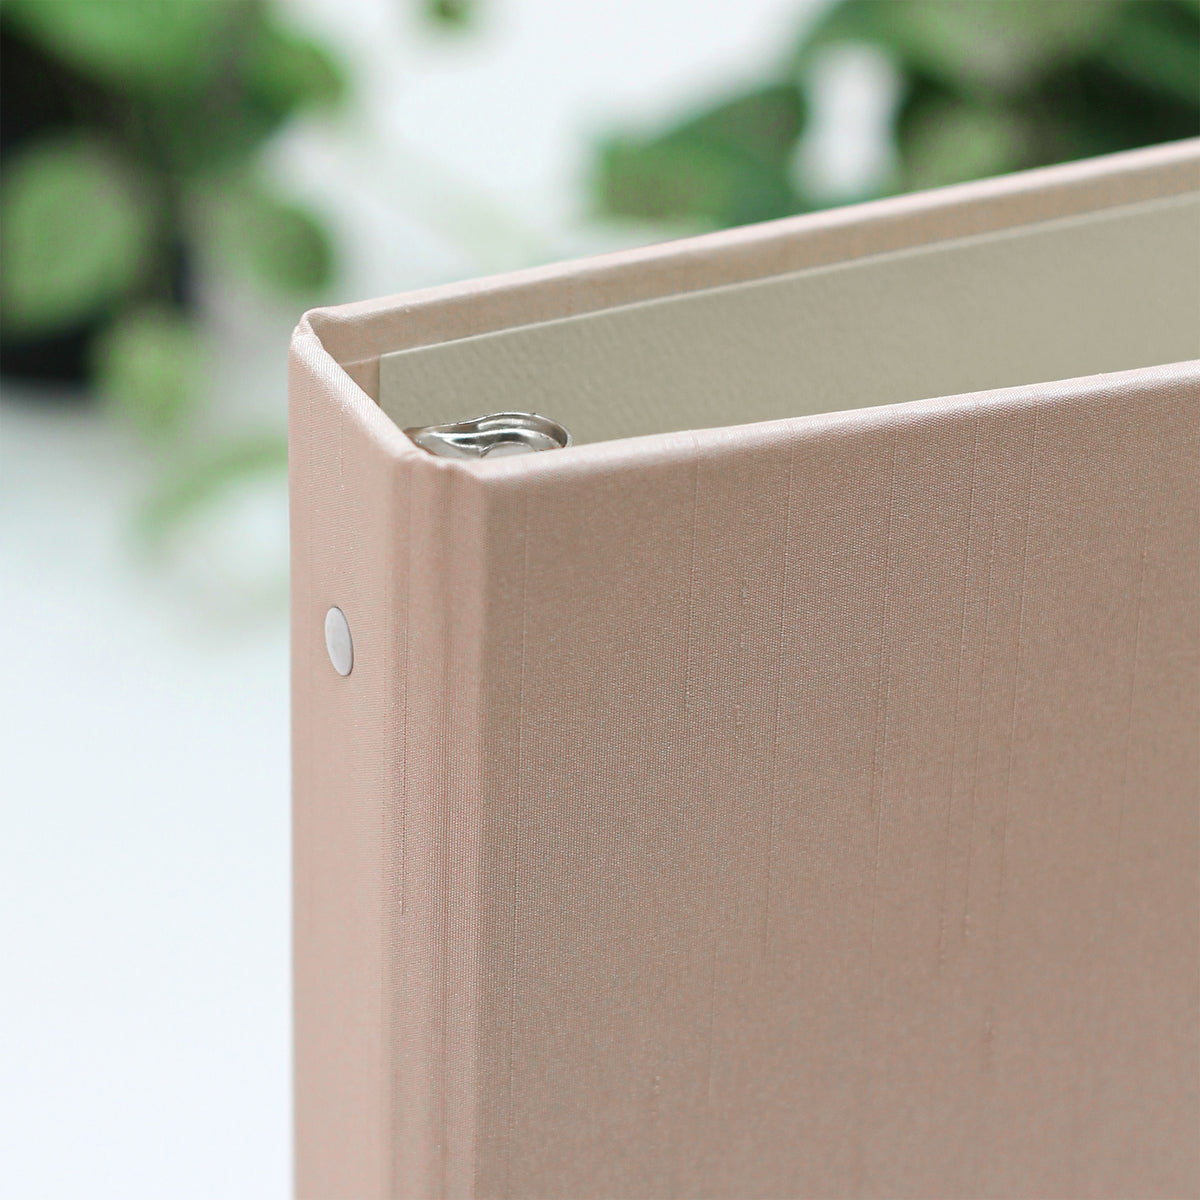 Large Photo Binder For 4x6 Photos | Cover: Blush Pink Silk | Available Personalized